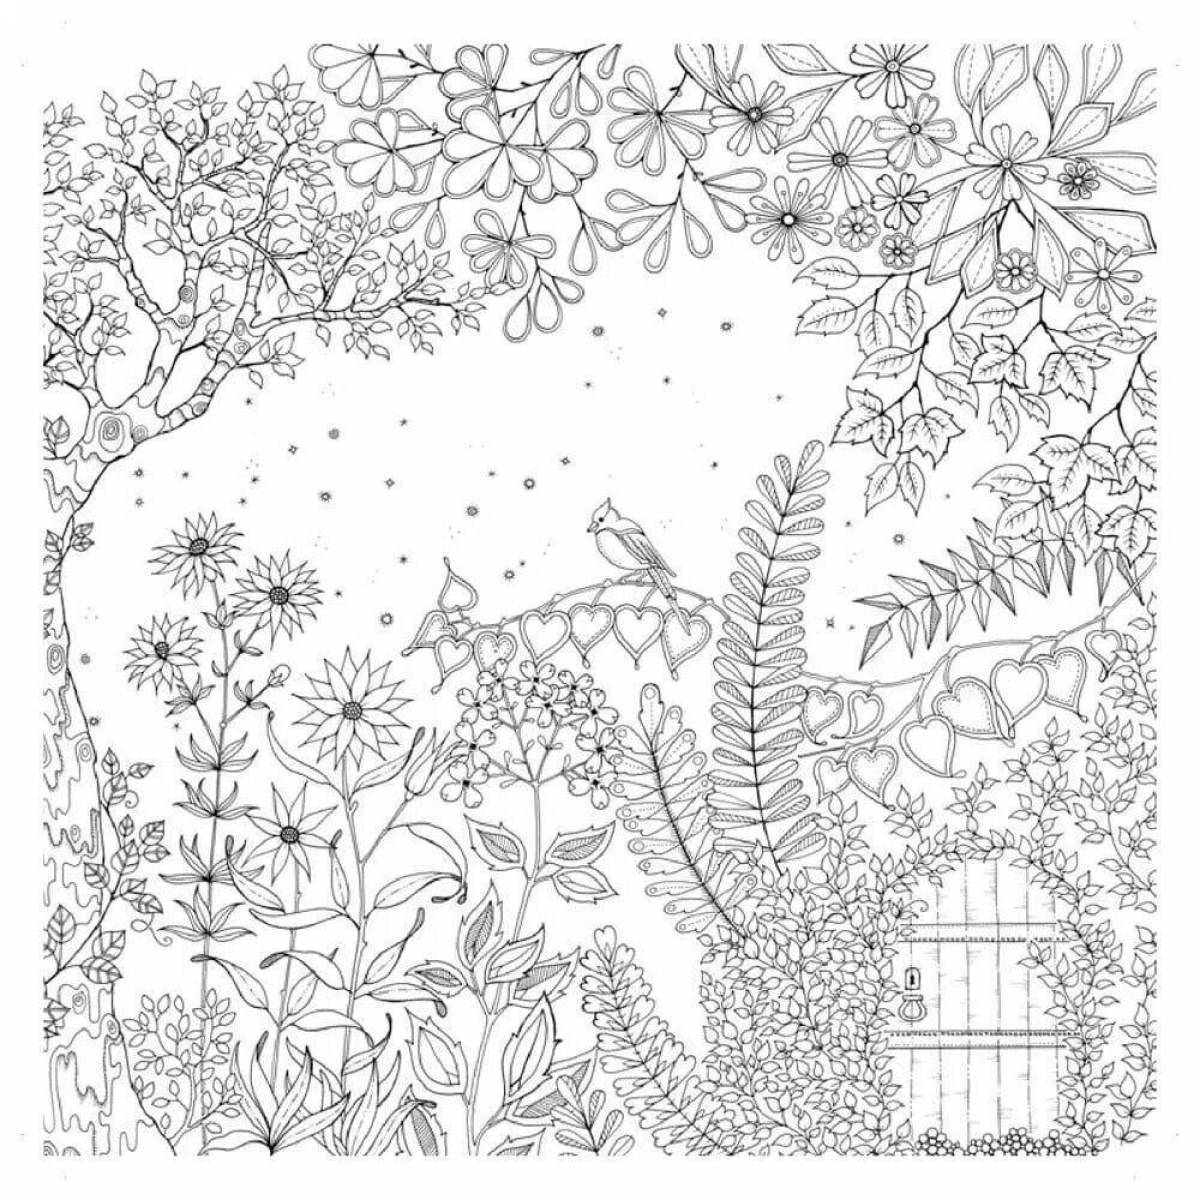 Incredible coloring book antistress mysterious forest